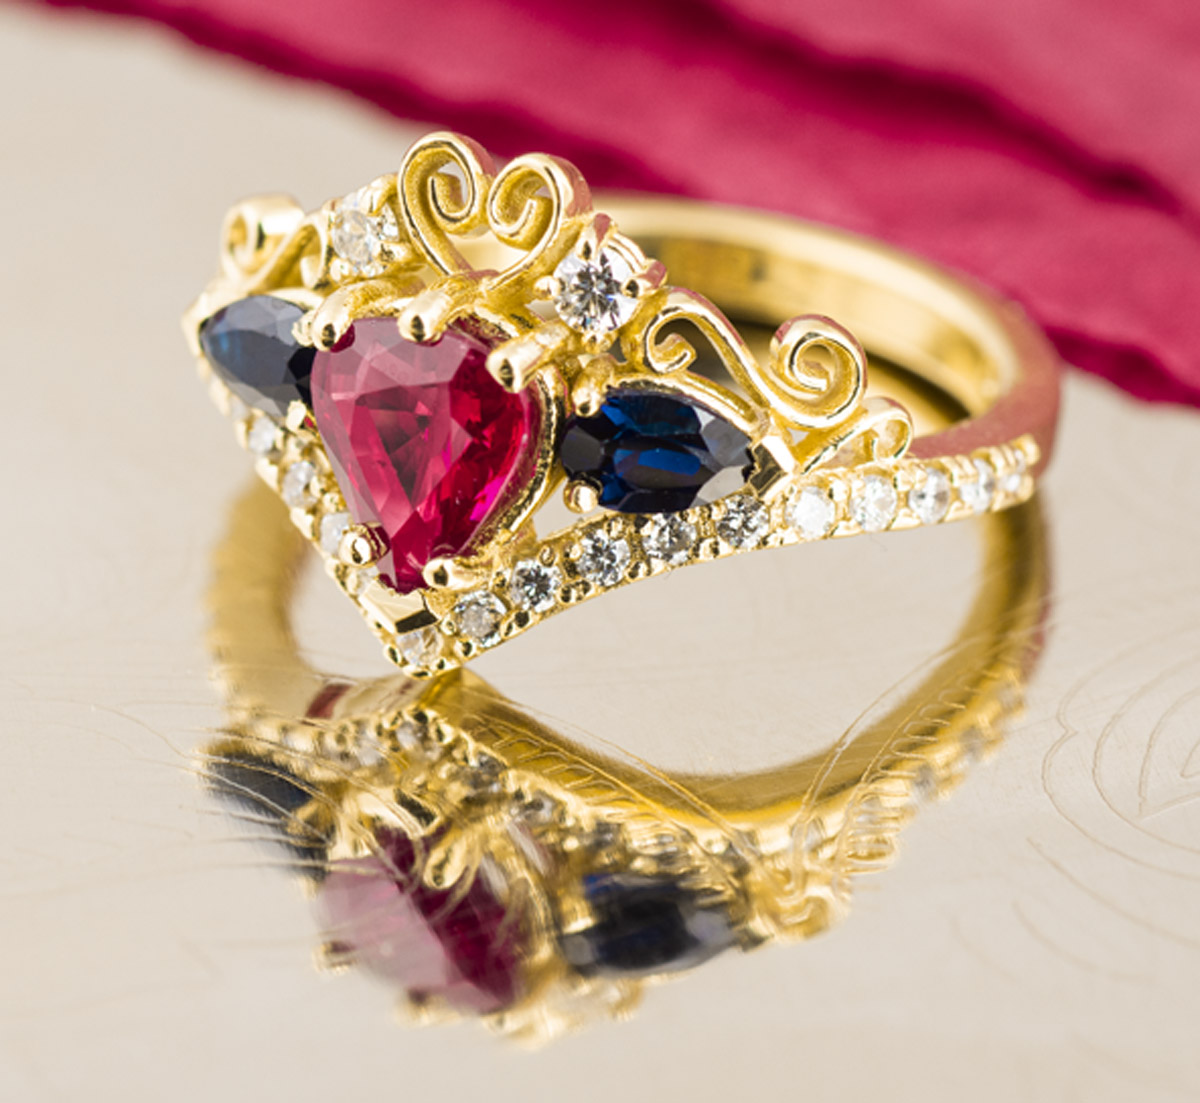 Bailey's Estate Crown Ring with Diamonds and Rubies – Bailey's Fine Jewelry